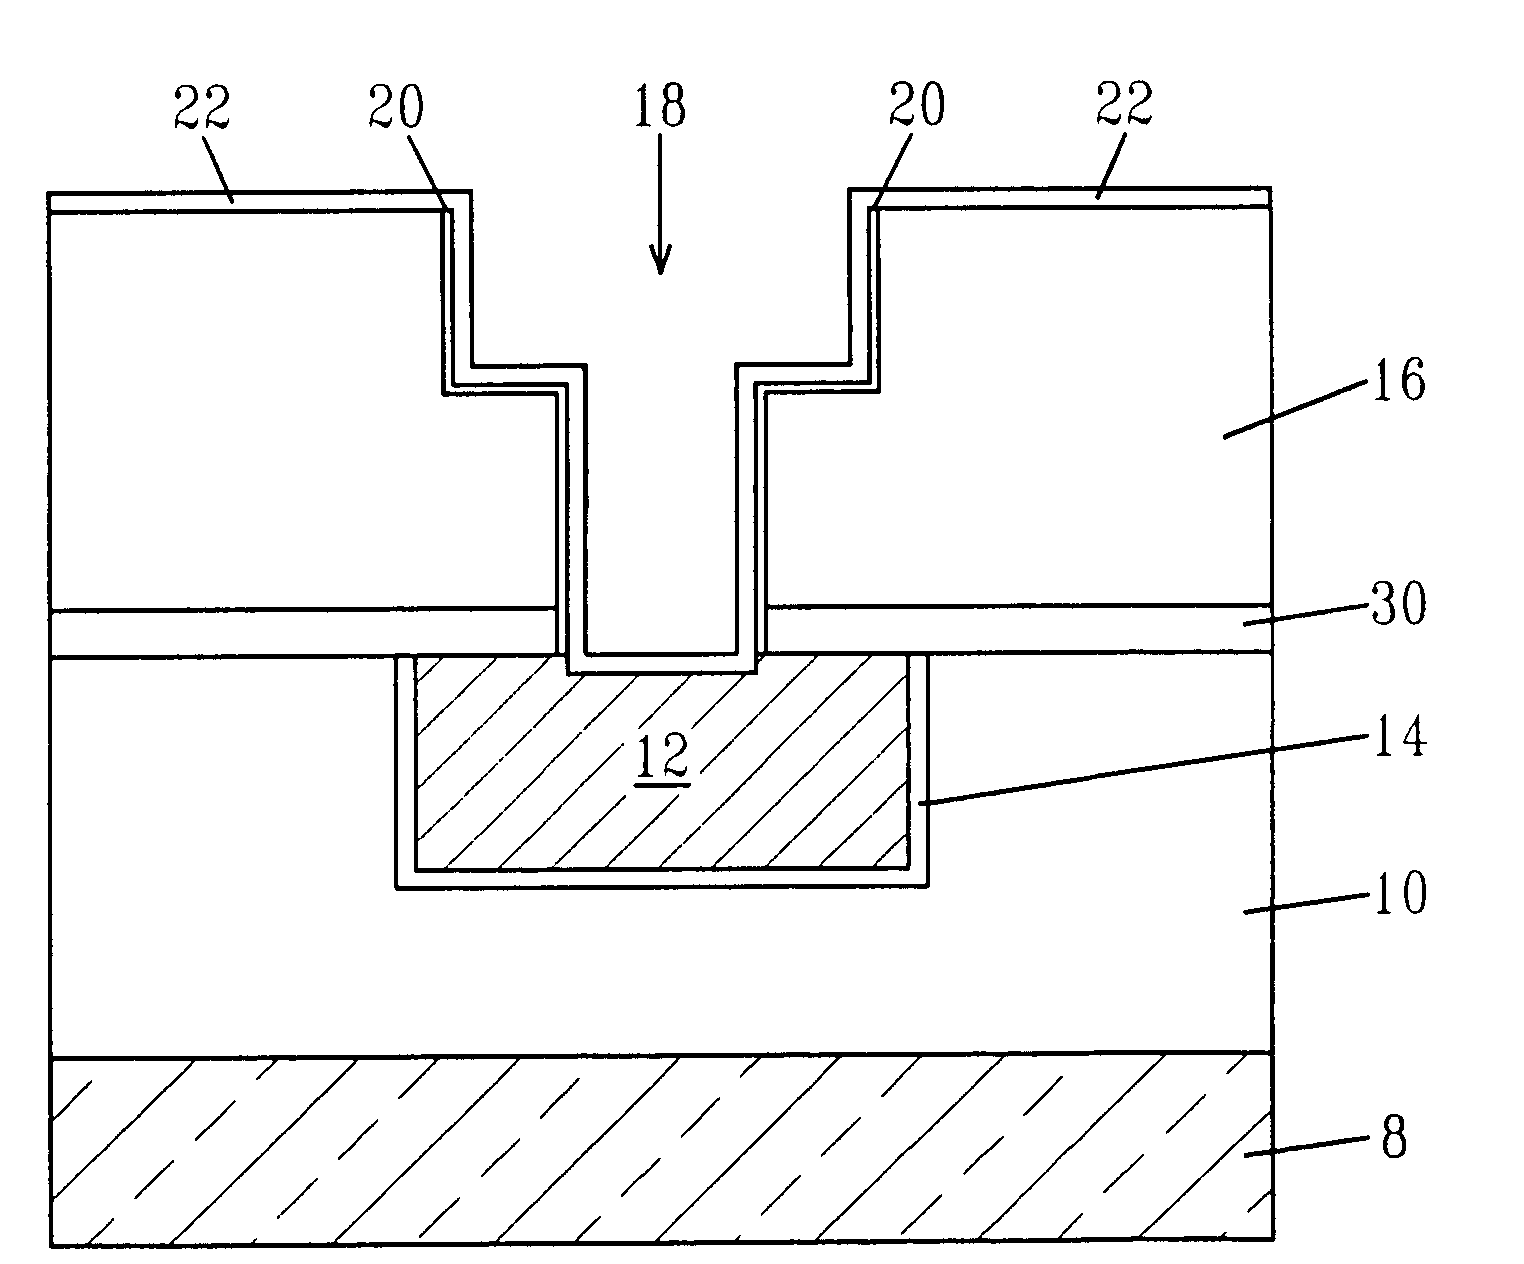 Process for forming an electrically conductive interconnect